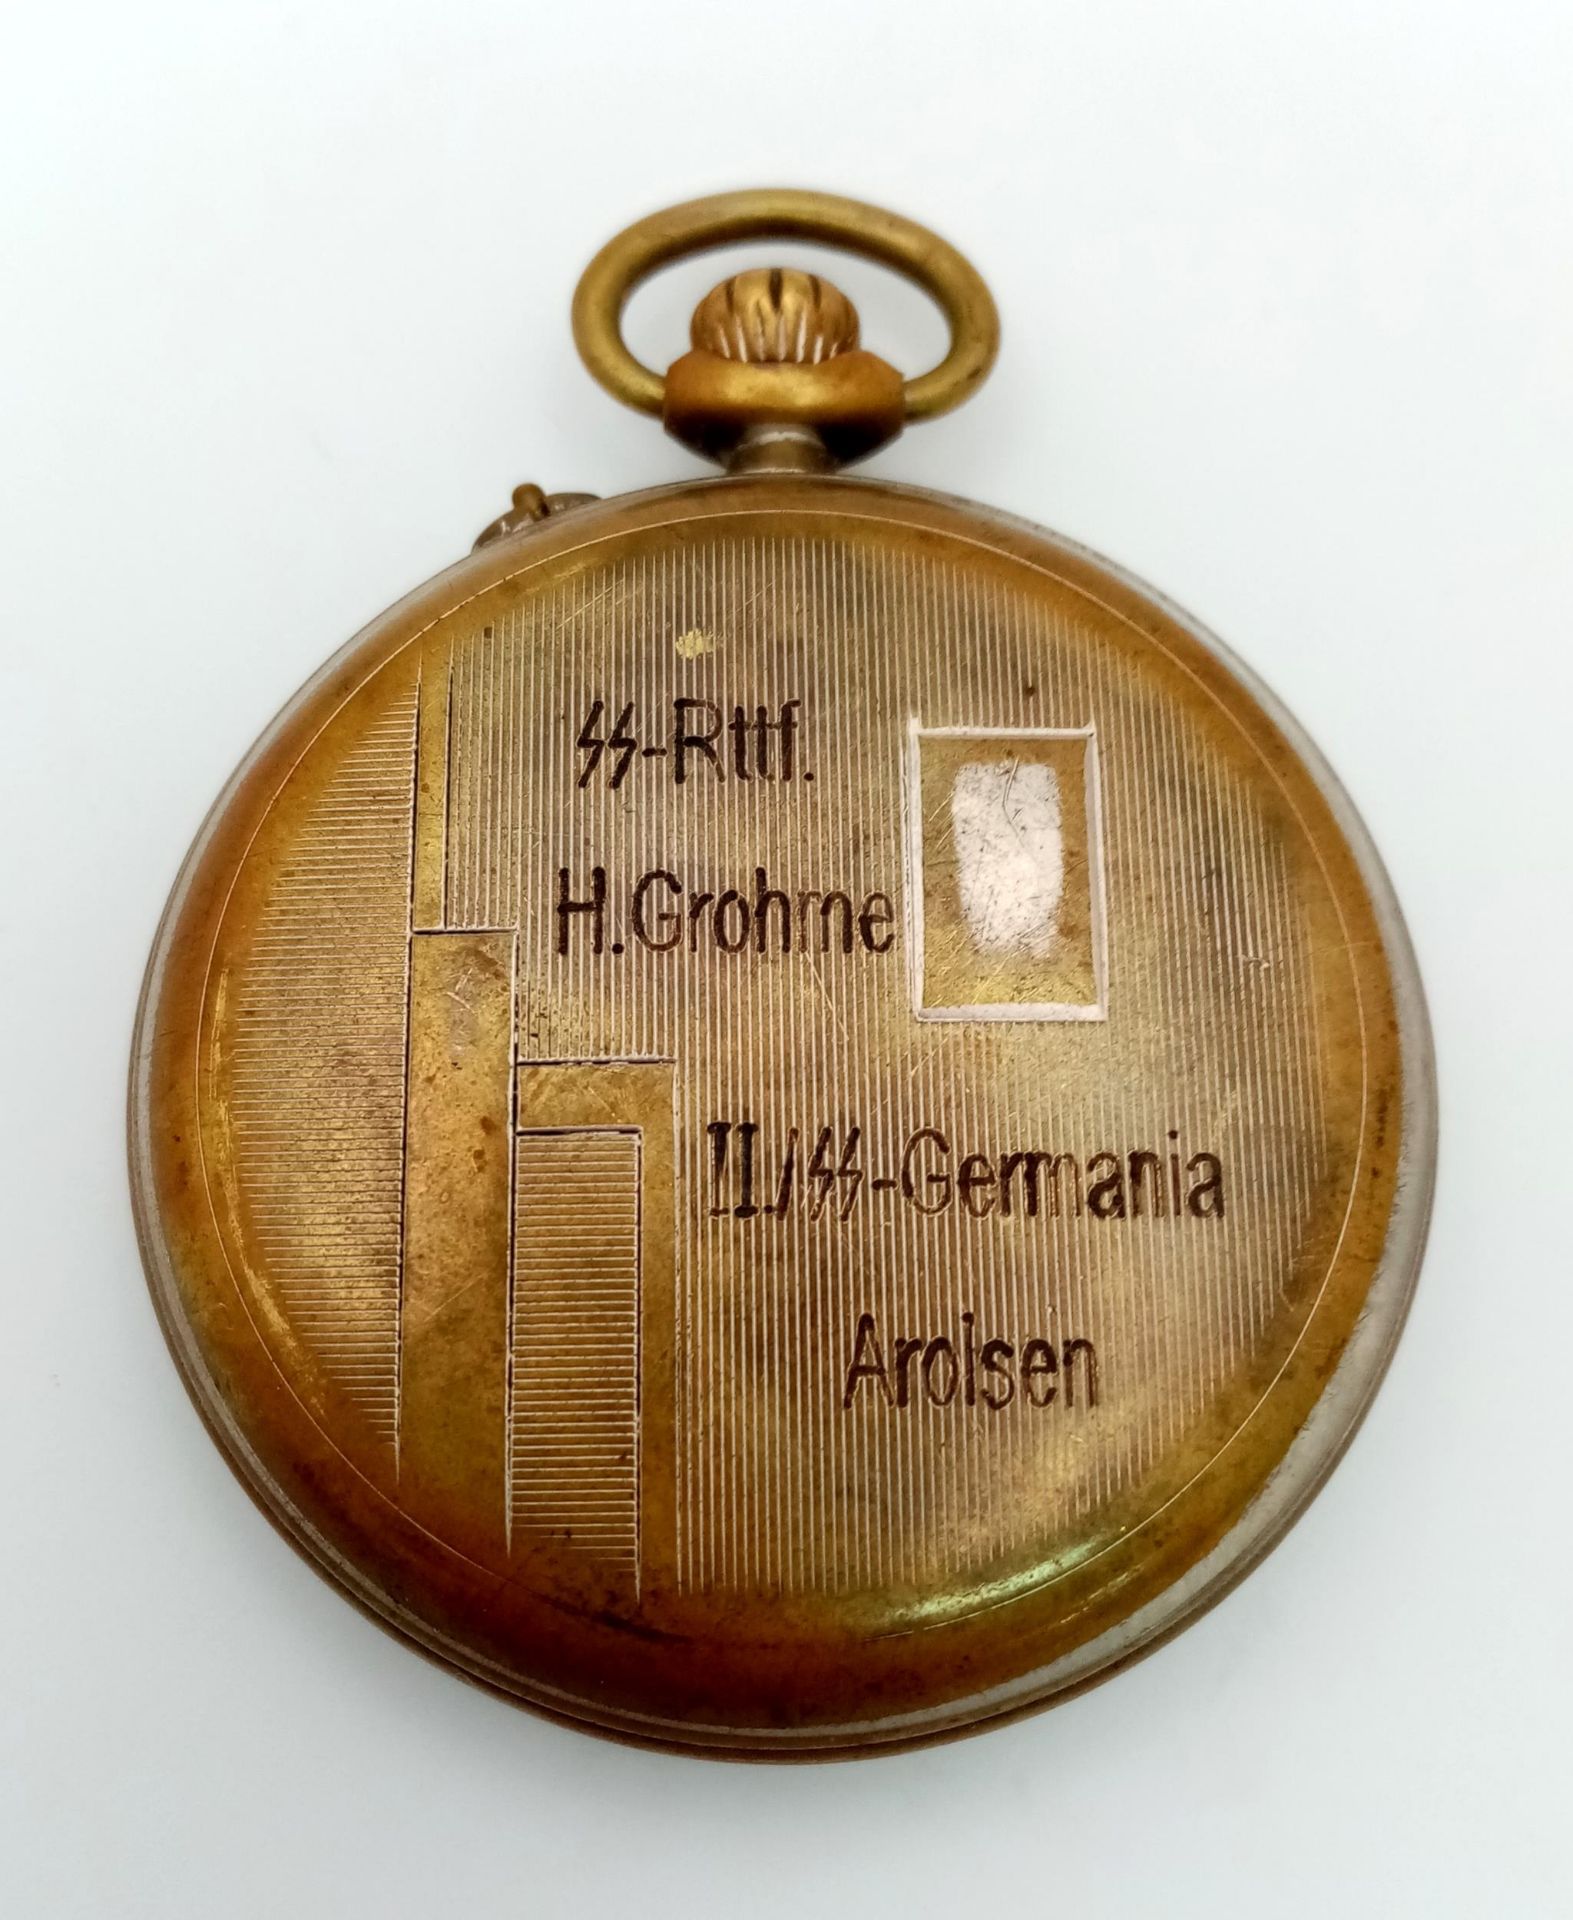 WW2 Period German Pocket Watch dedicated to a Soldier in the II/SS Germania Regiment which were - Image 4 of 4